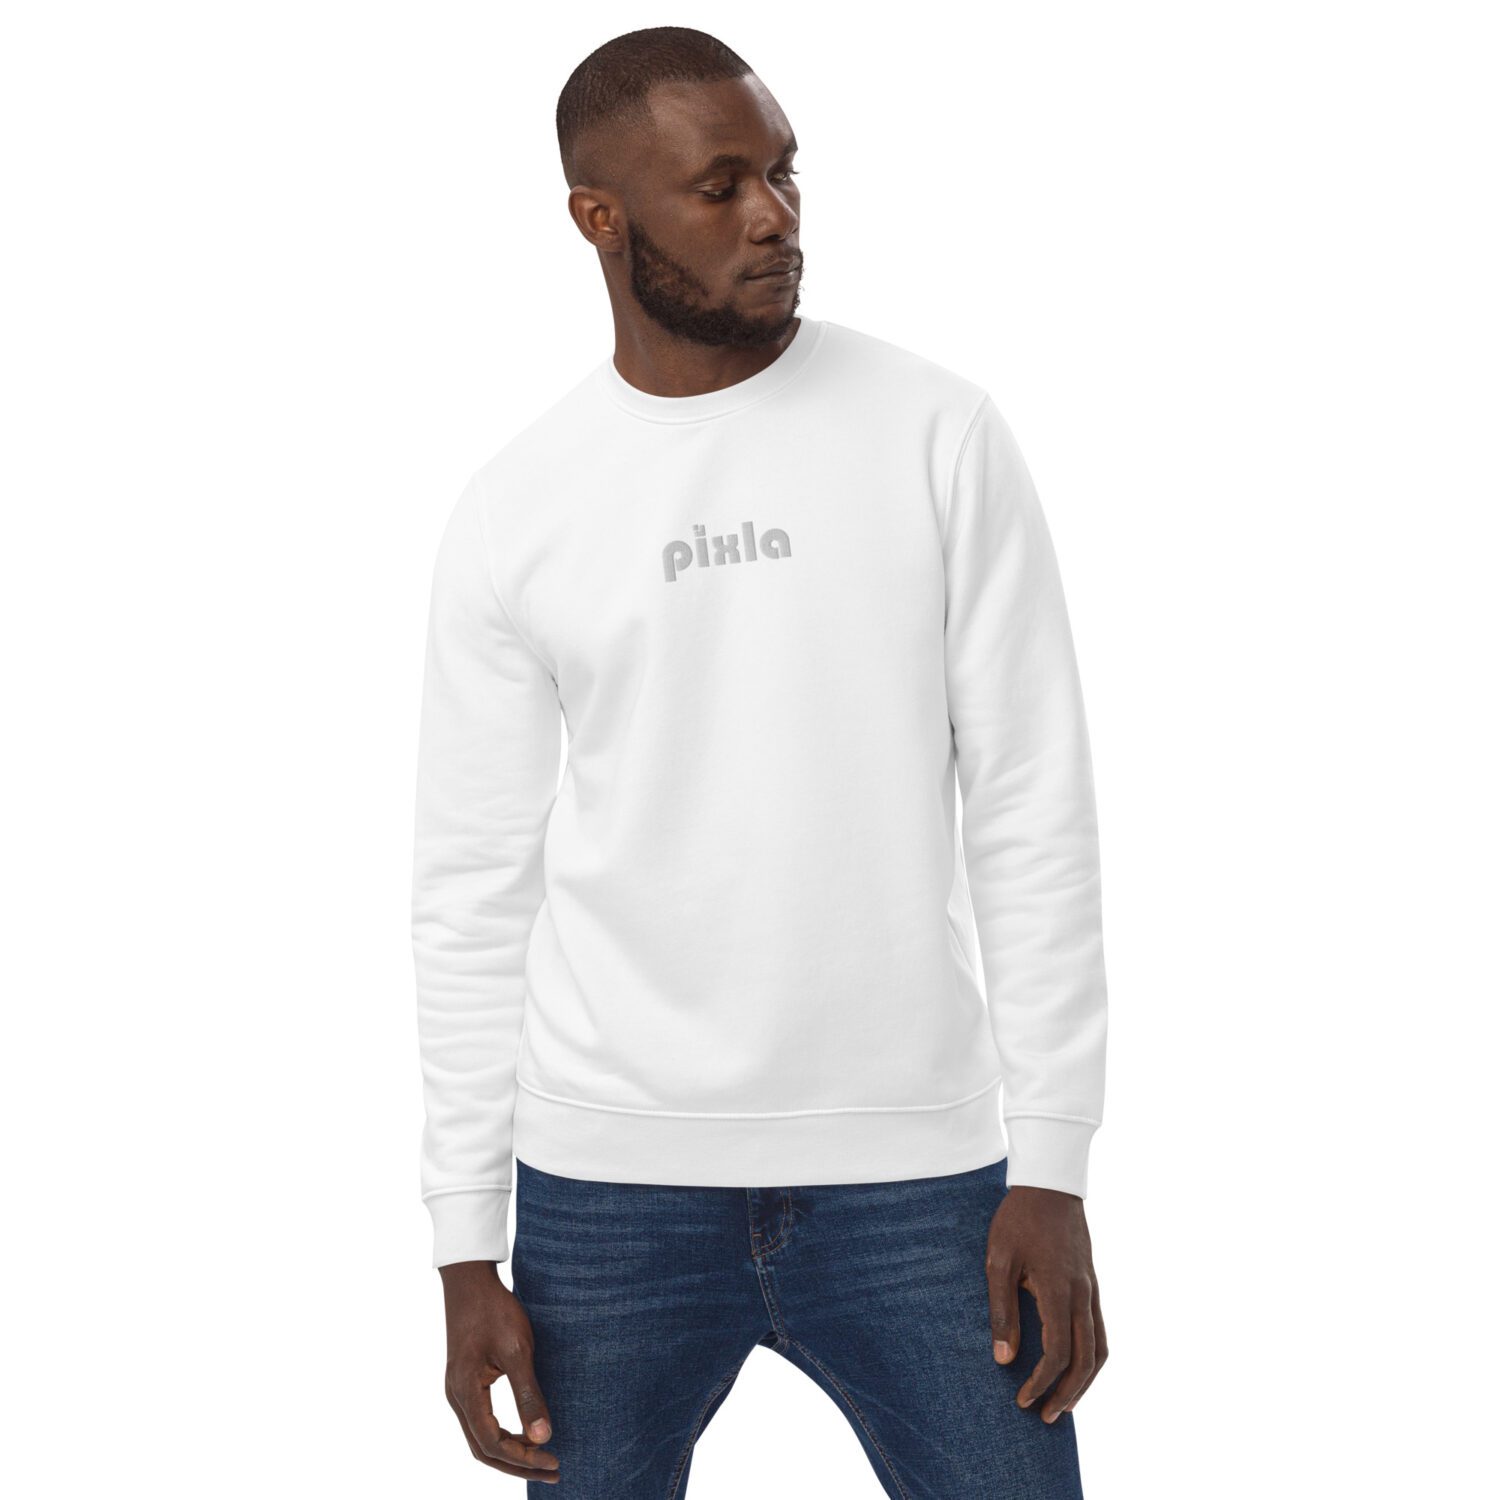 A classic slim-fit white-on-white premium sweatshirt with crispy white embroidery on the front chest. Made from organic ring-spun combed cotton and recycled polyester in medium-weight with a soft feel. Super soft fleece inside making it perfect for keeping warm.